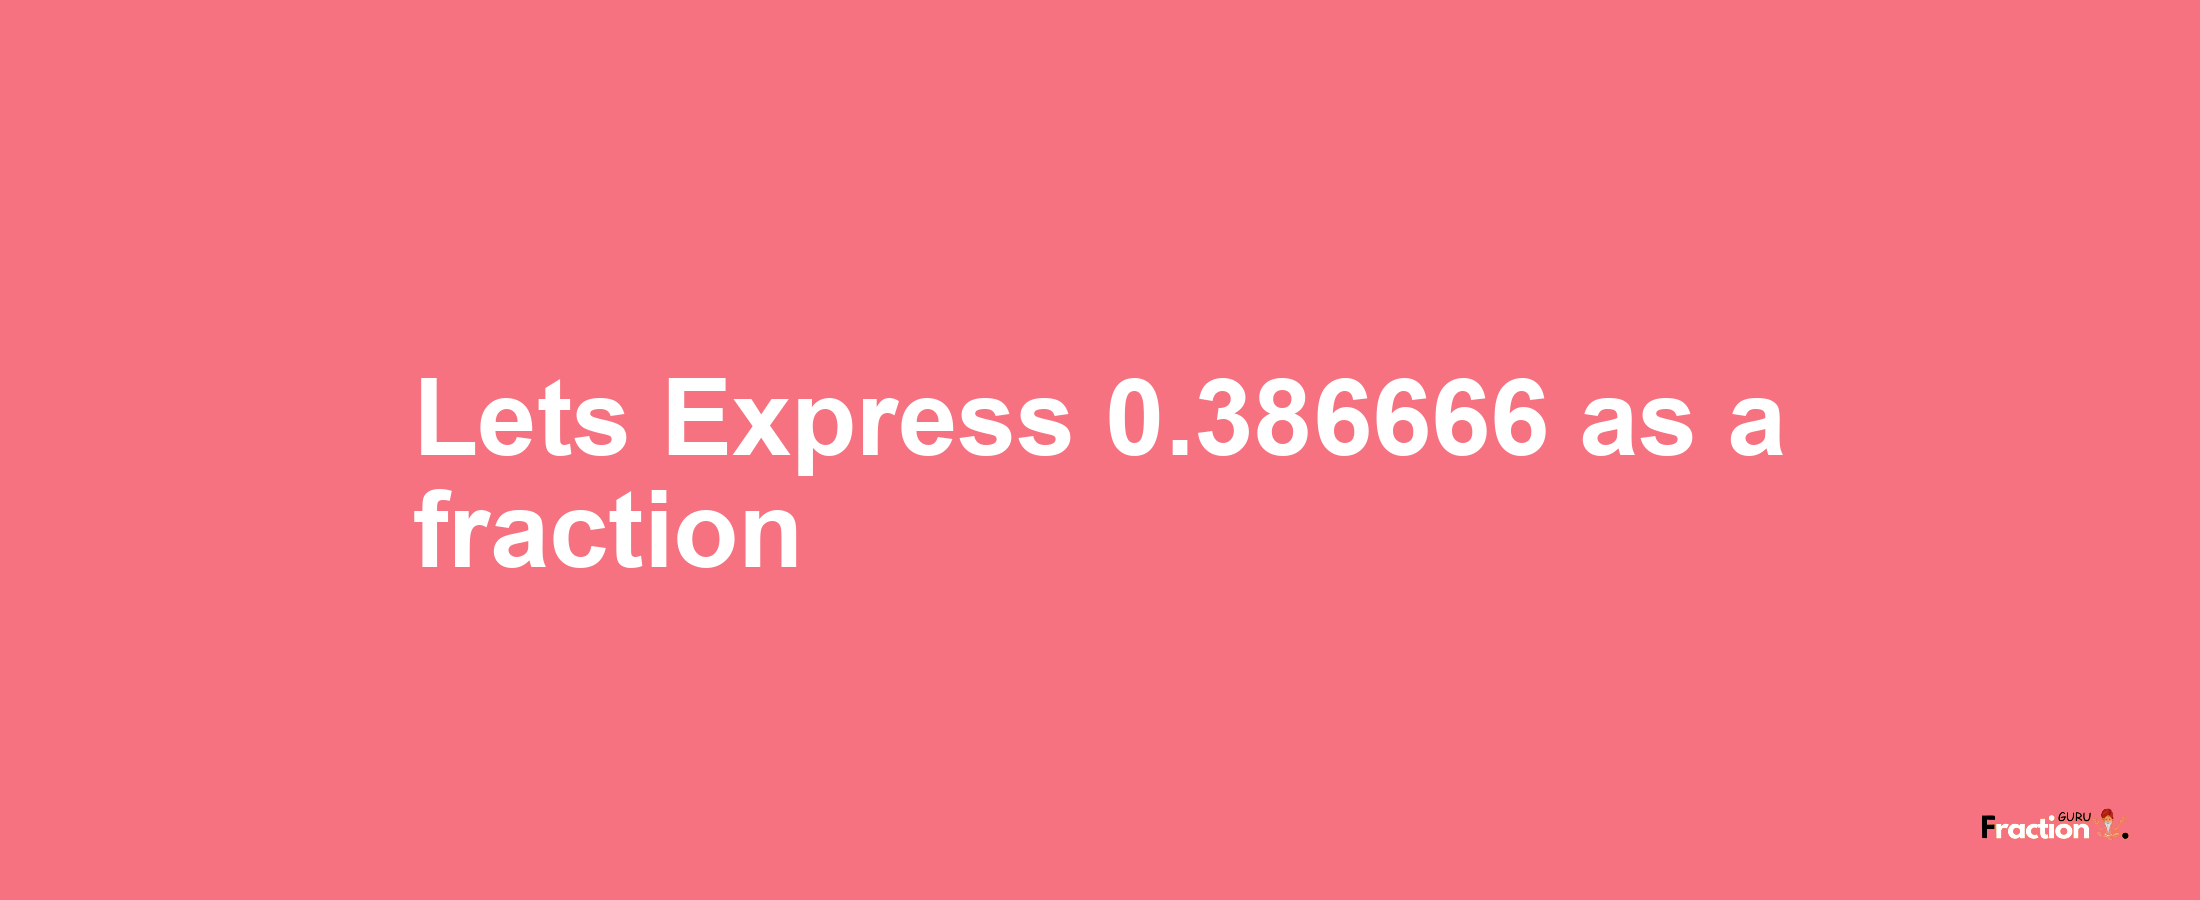 Lets Express 0.386666 as afraction